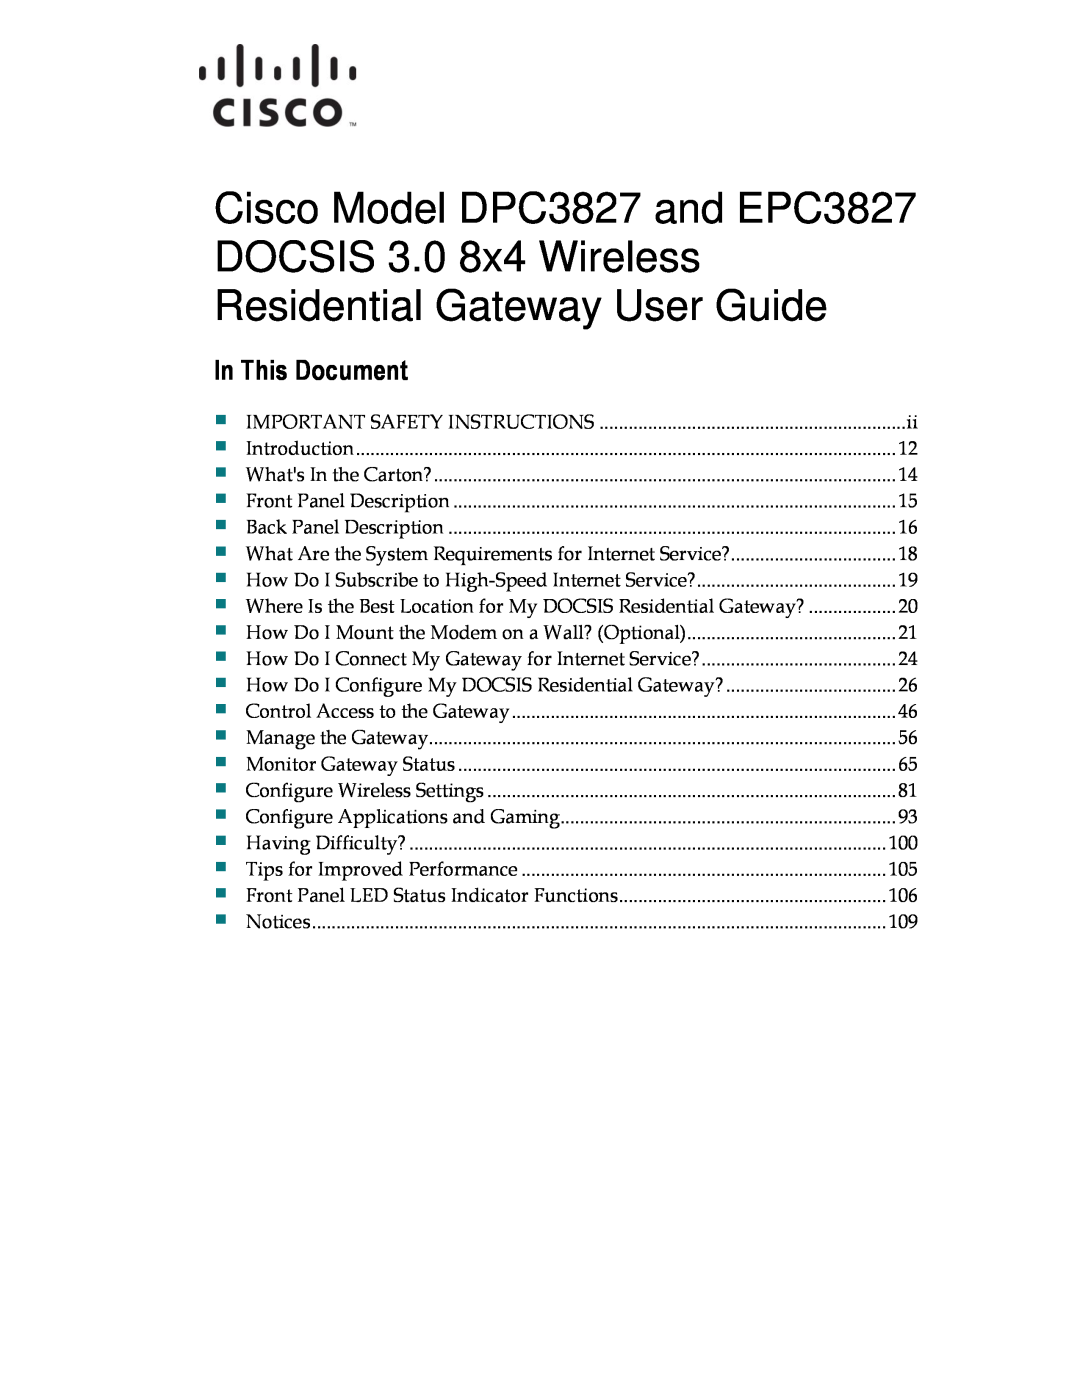 Cisco Systems DPC3827, EPC3827 important safety instructions In This Document,                     